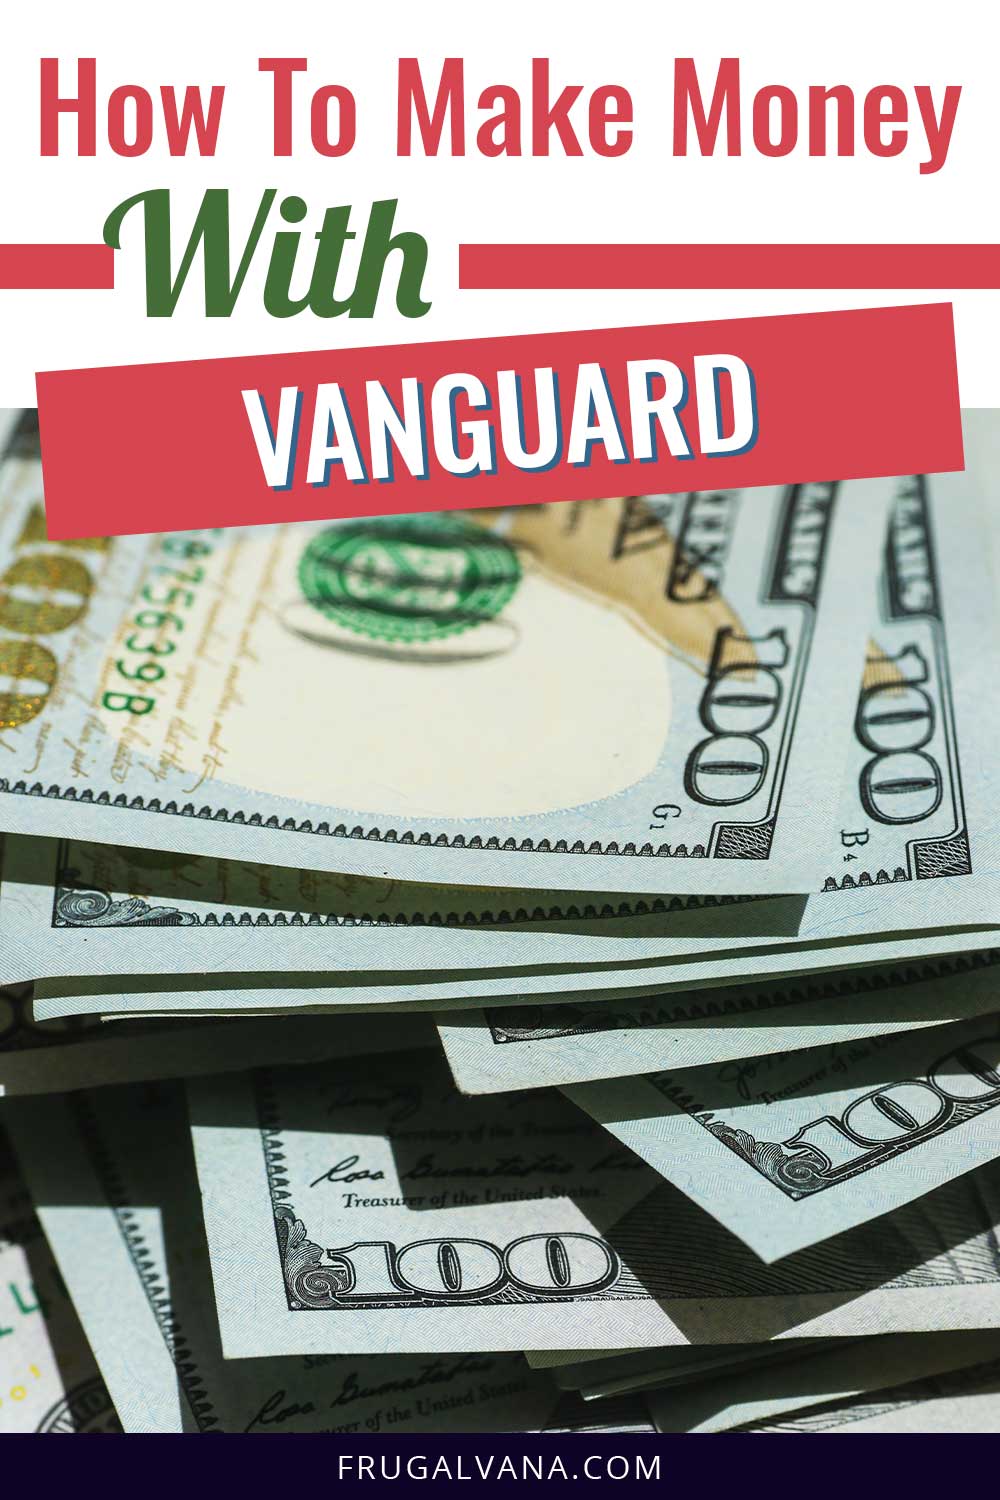 How To Make Money With Vanguard